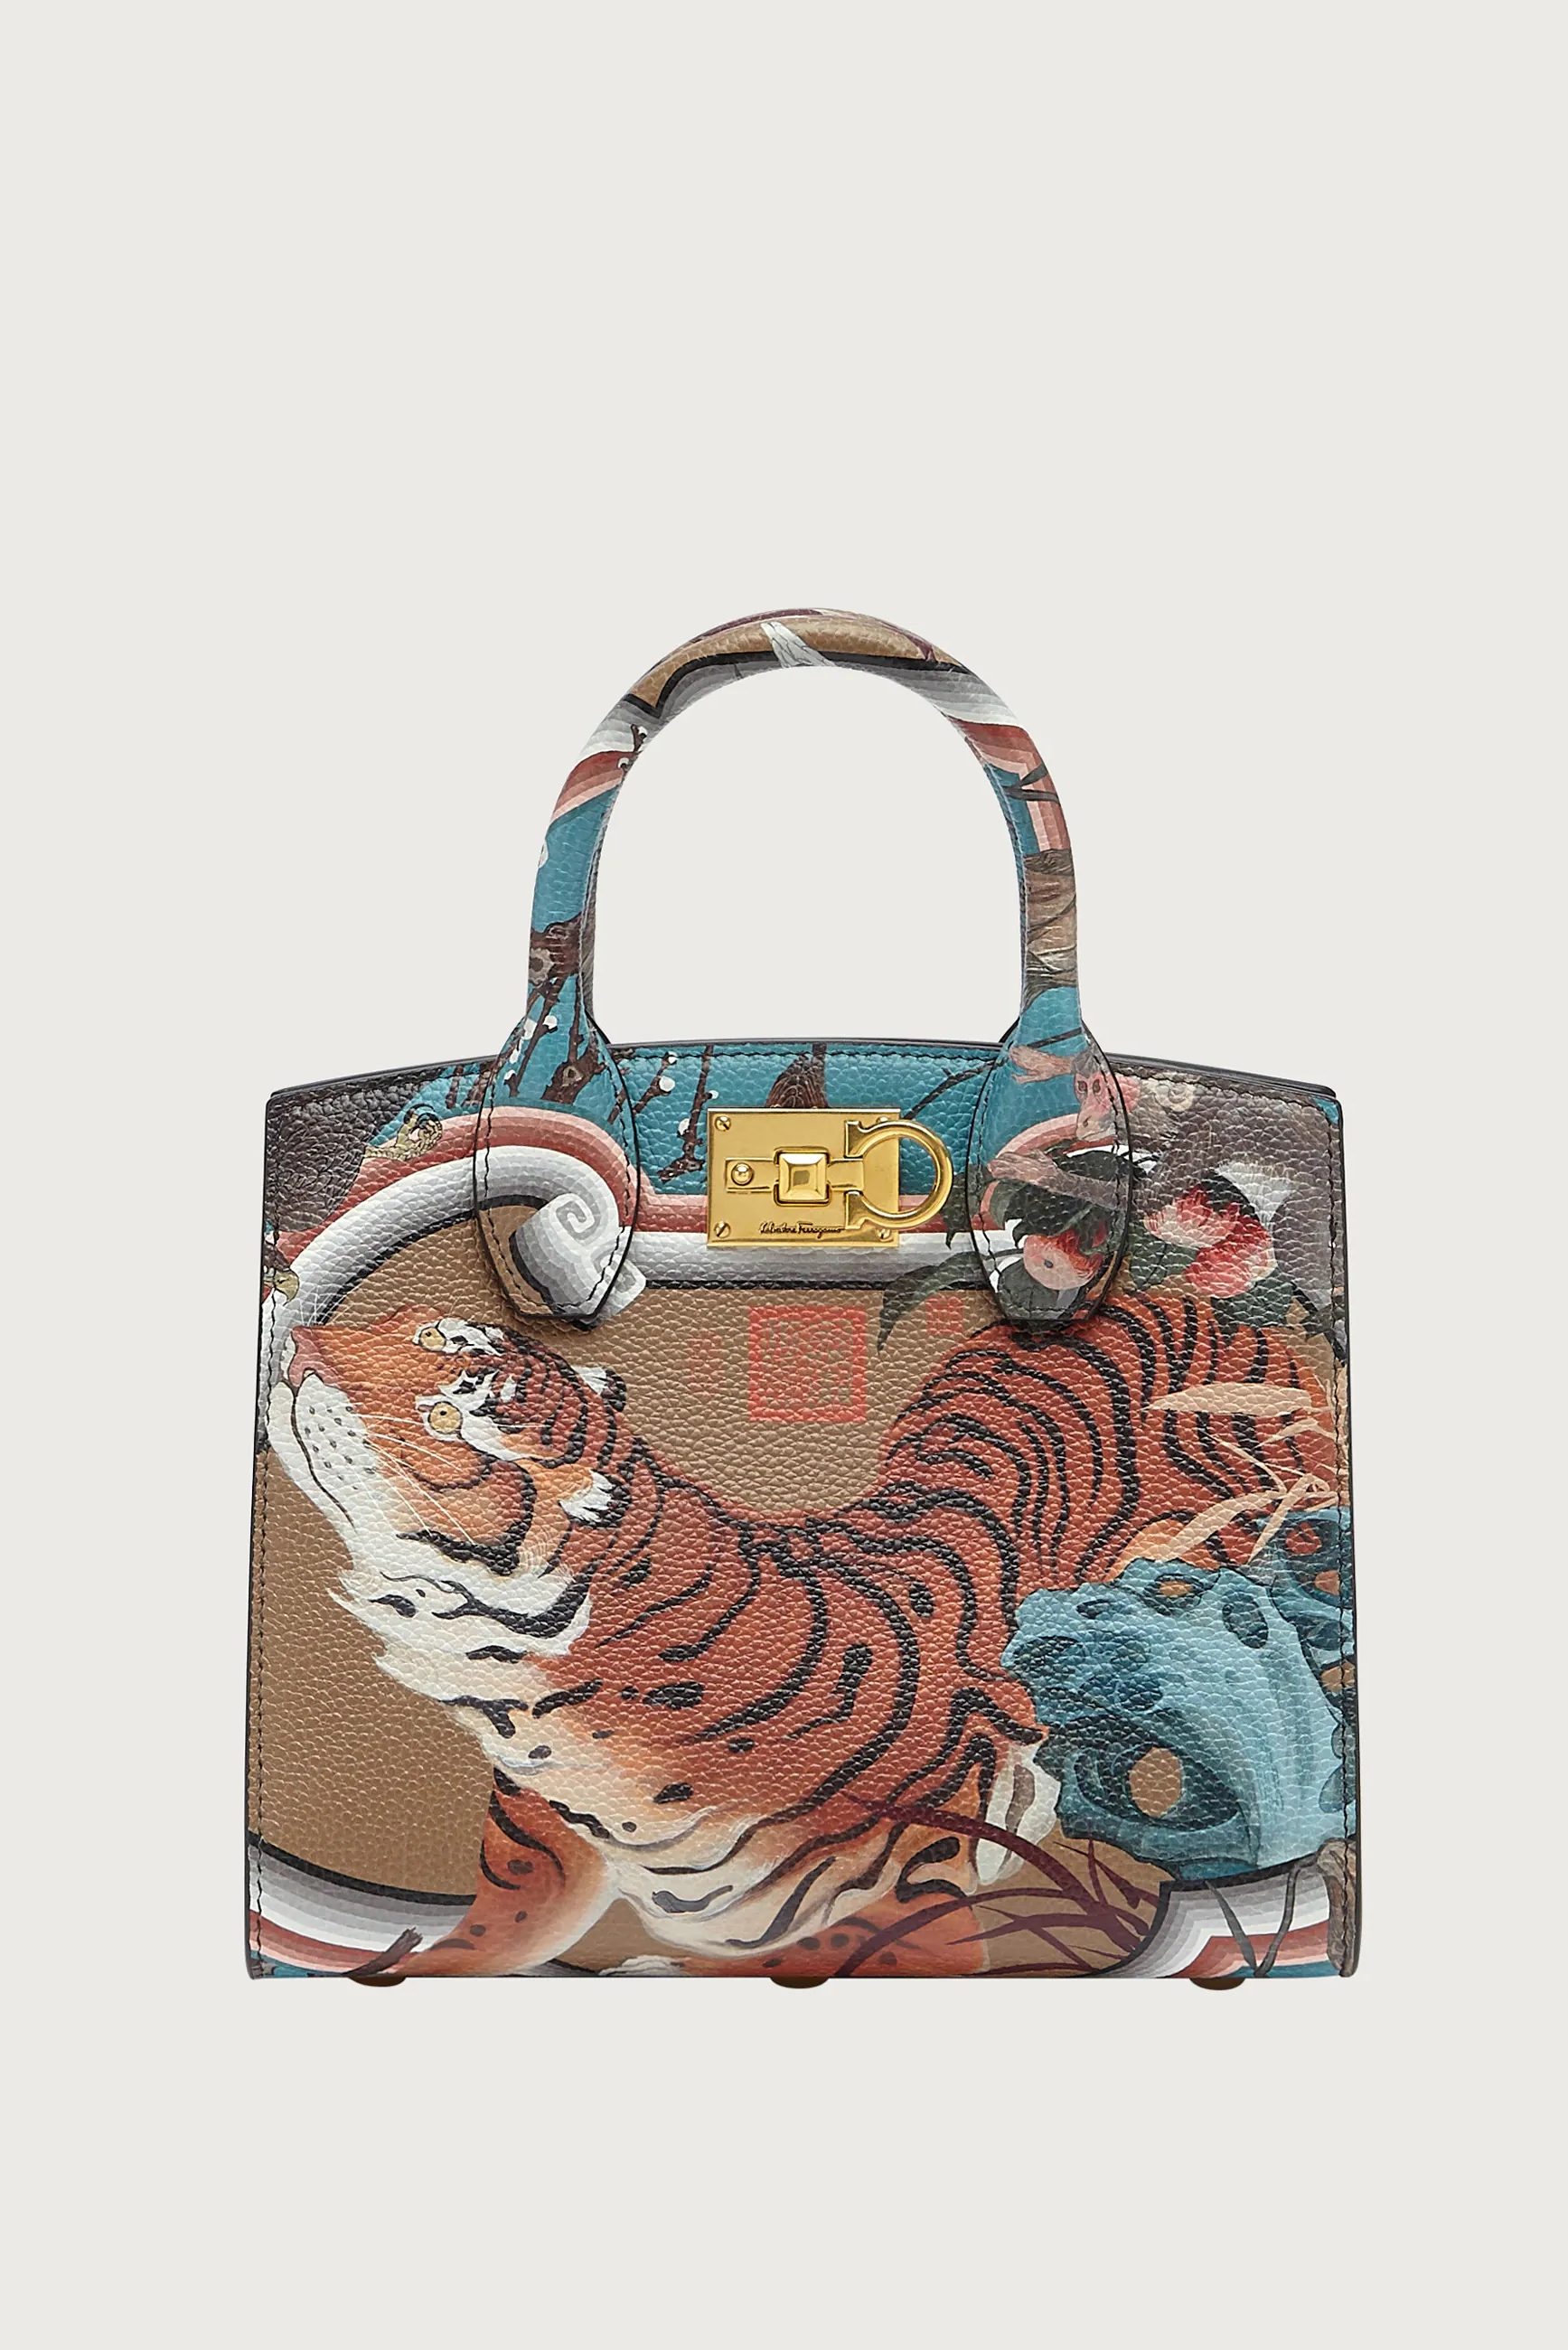 Fashion Update: Celebrate the Year of the Tiger with luxe prints